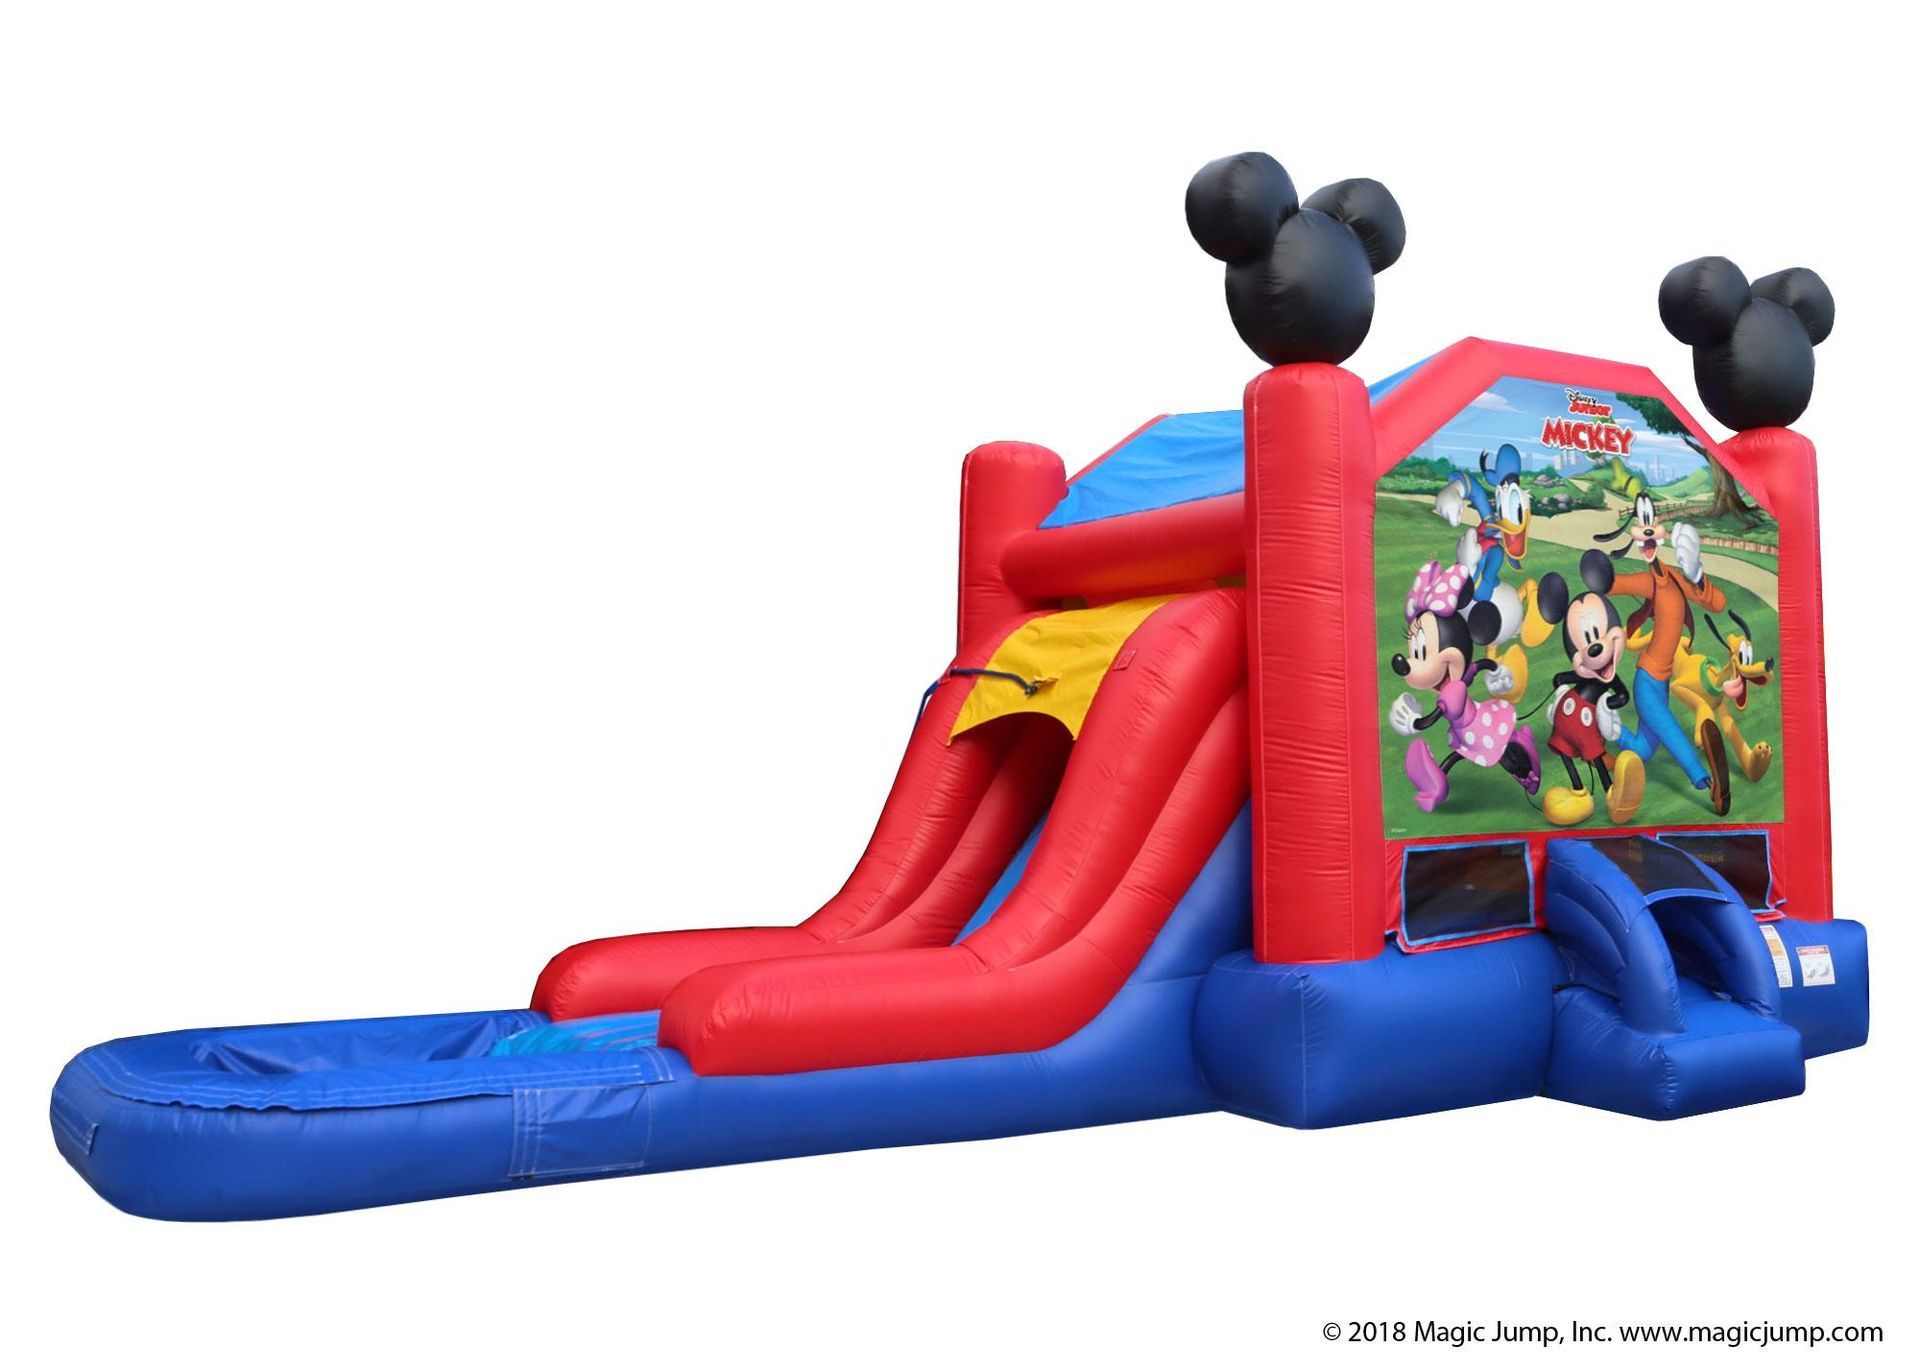 Mickey Mouse Bouncy House | Rancho Cucamonga, CA | Jam Jam House of Party Rentals 